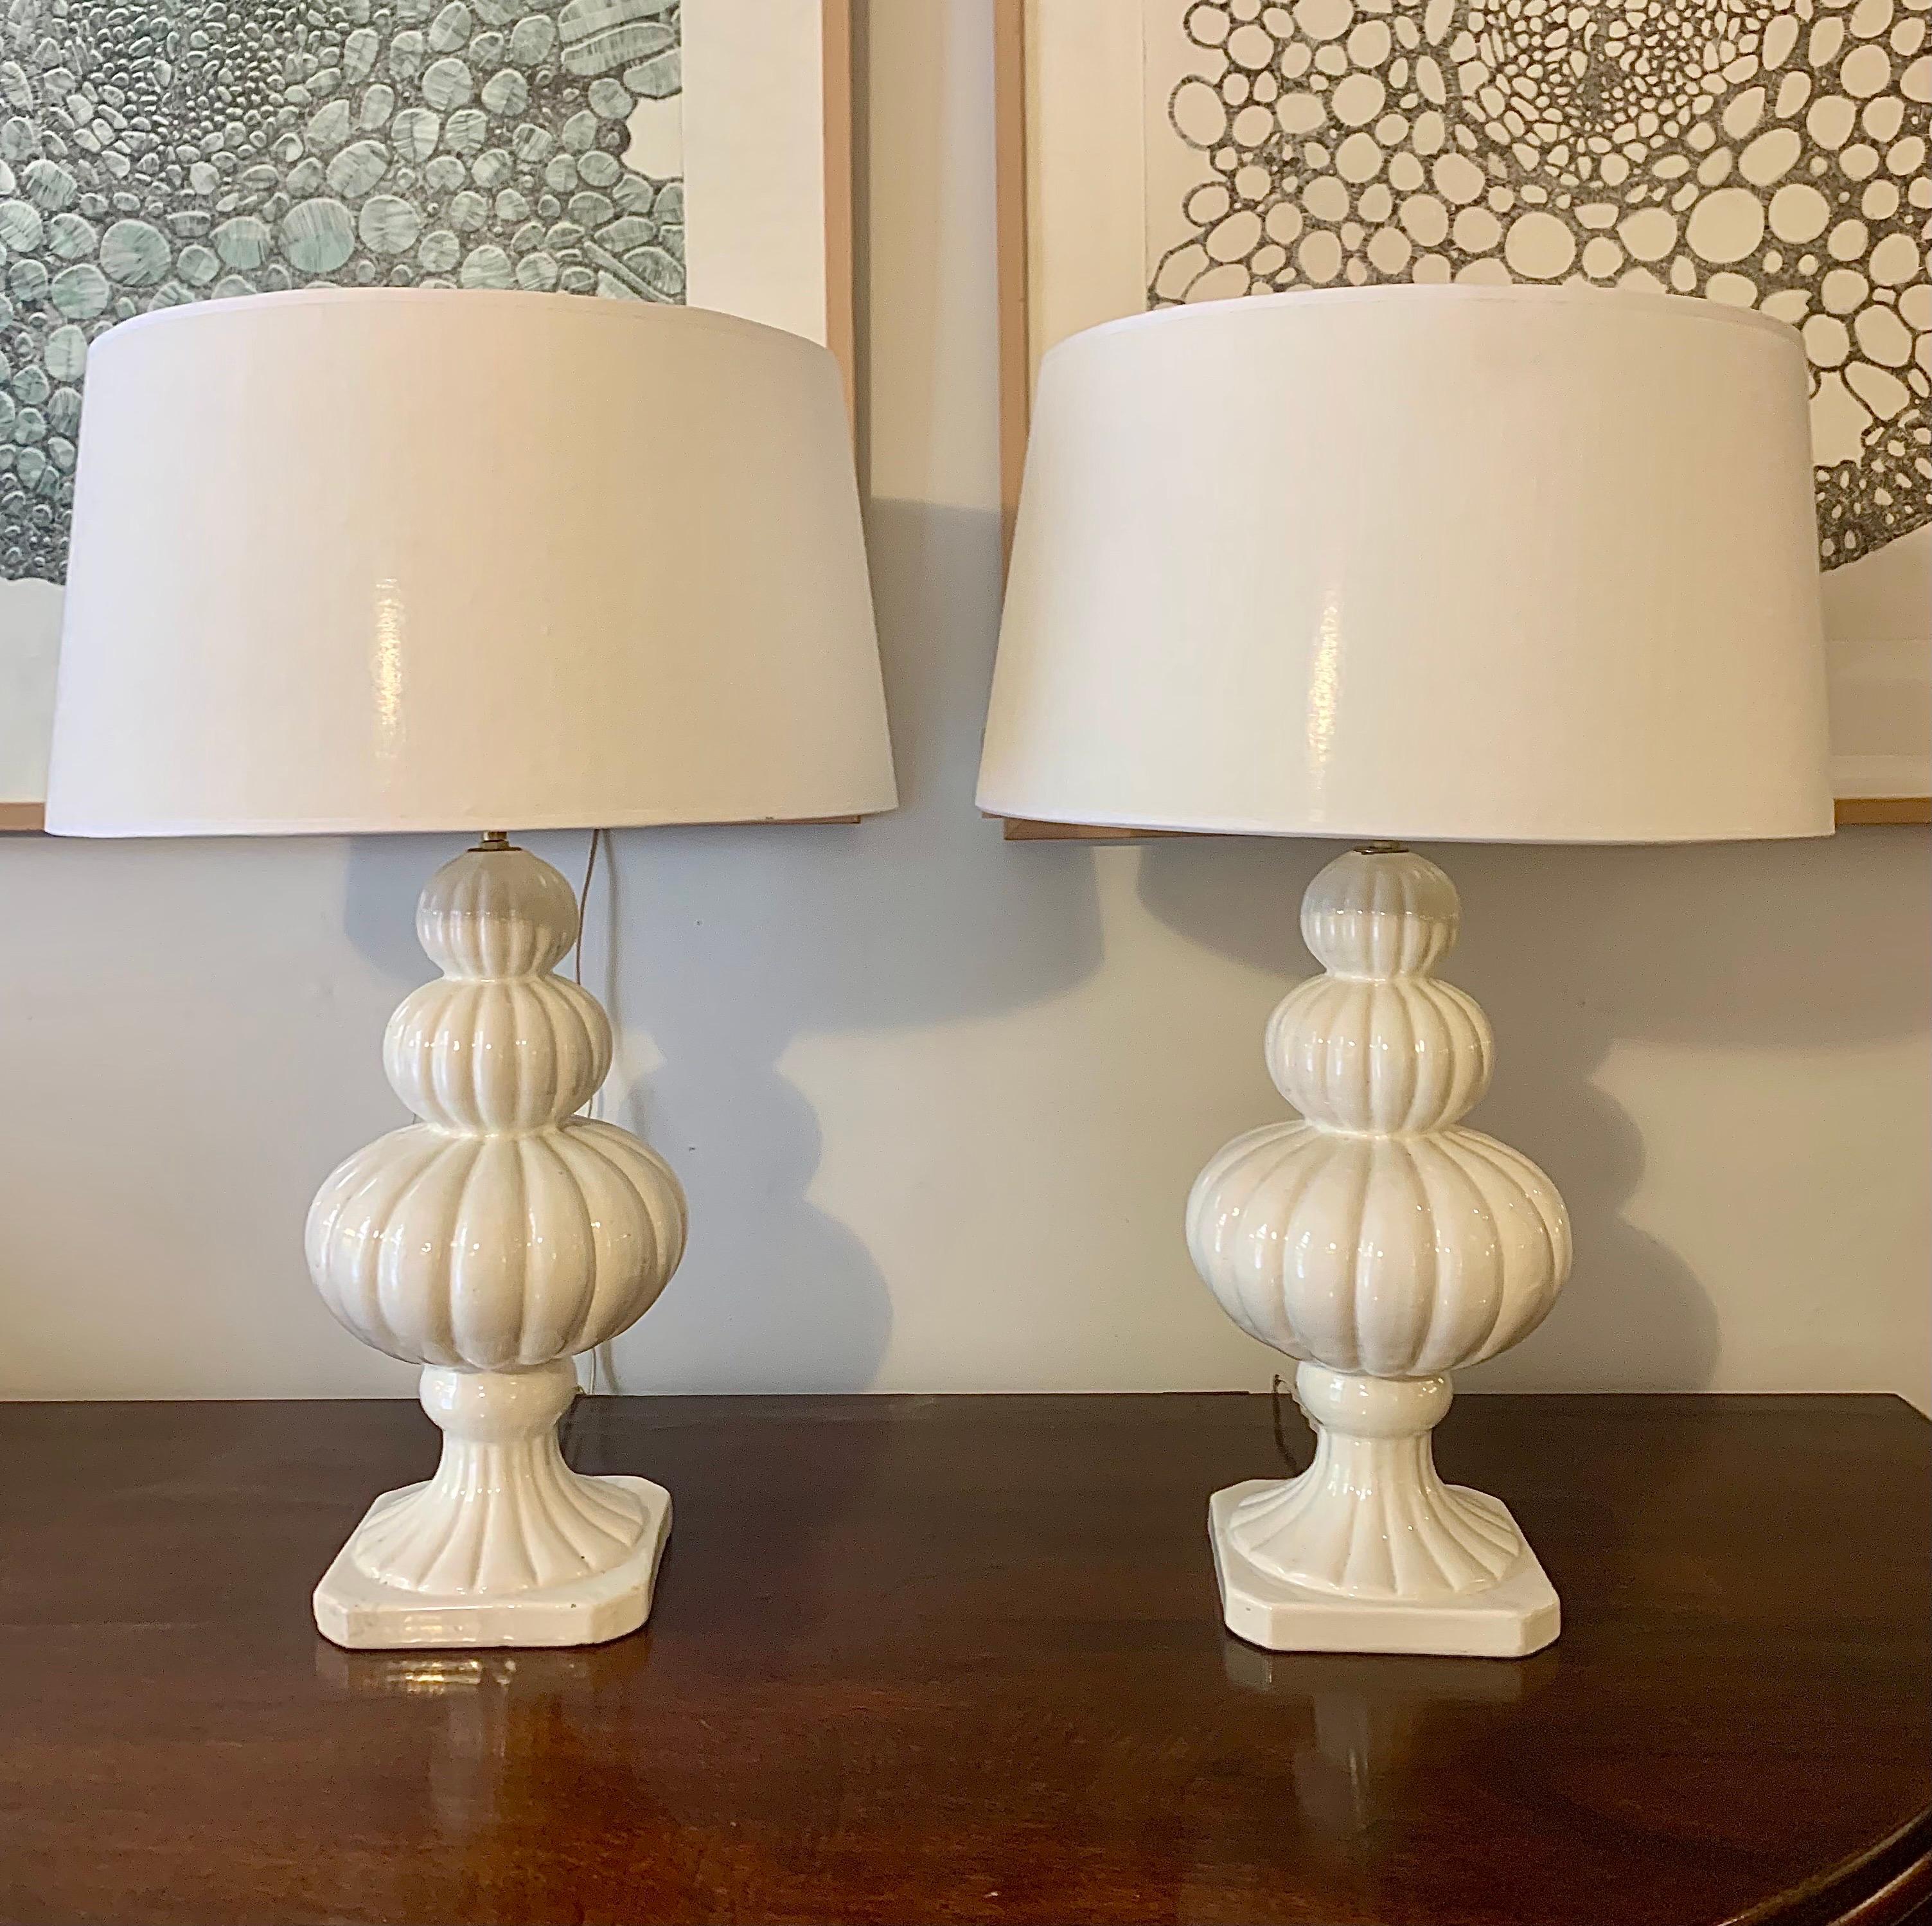 20th Midcentury Spanish Whithe Porcelain Table Lamps For Sale 2